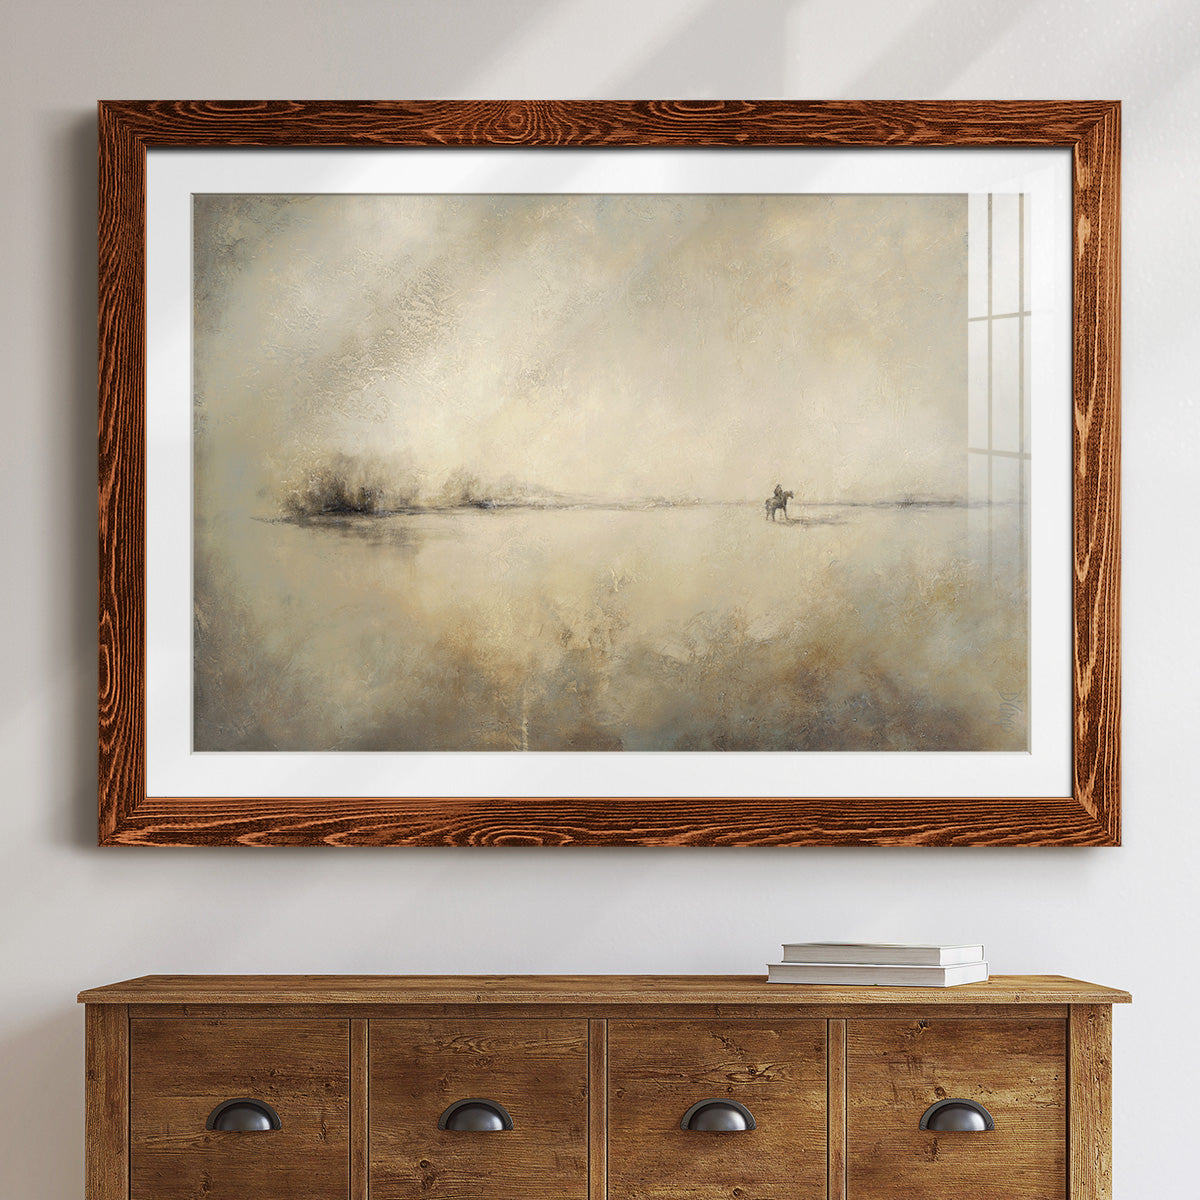 Travelers-Premium Framed Print - Ready to Hang